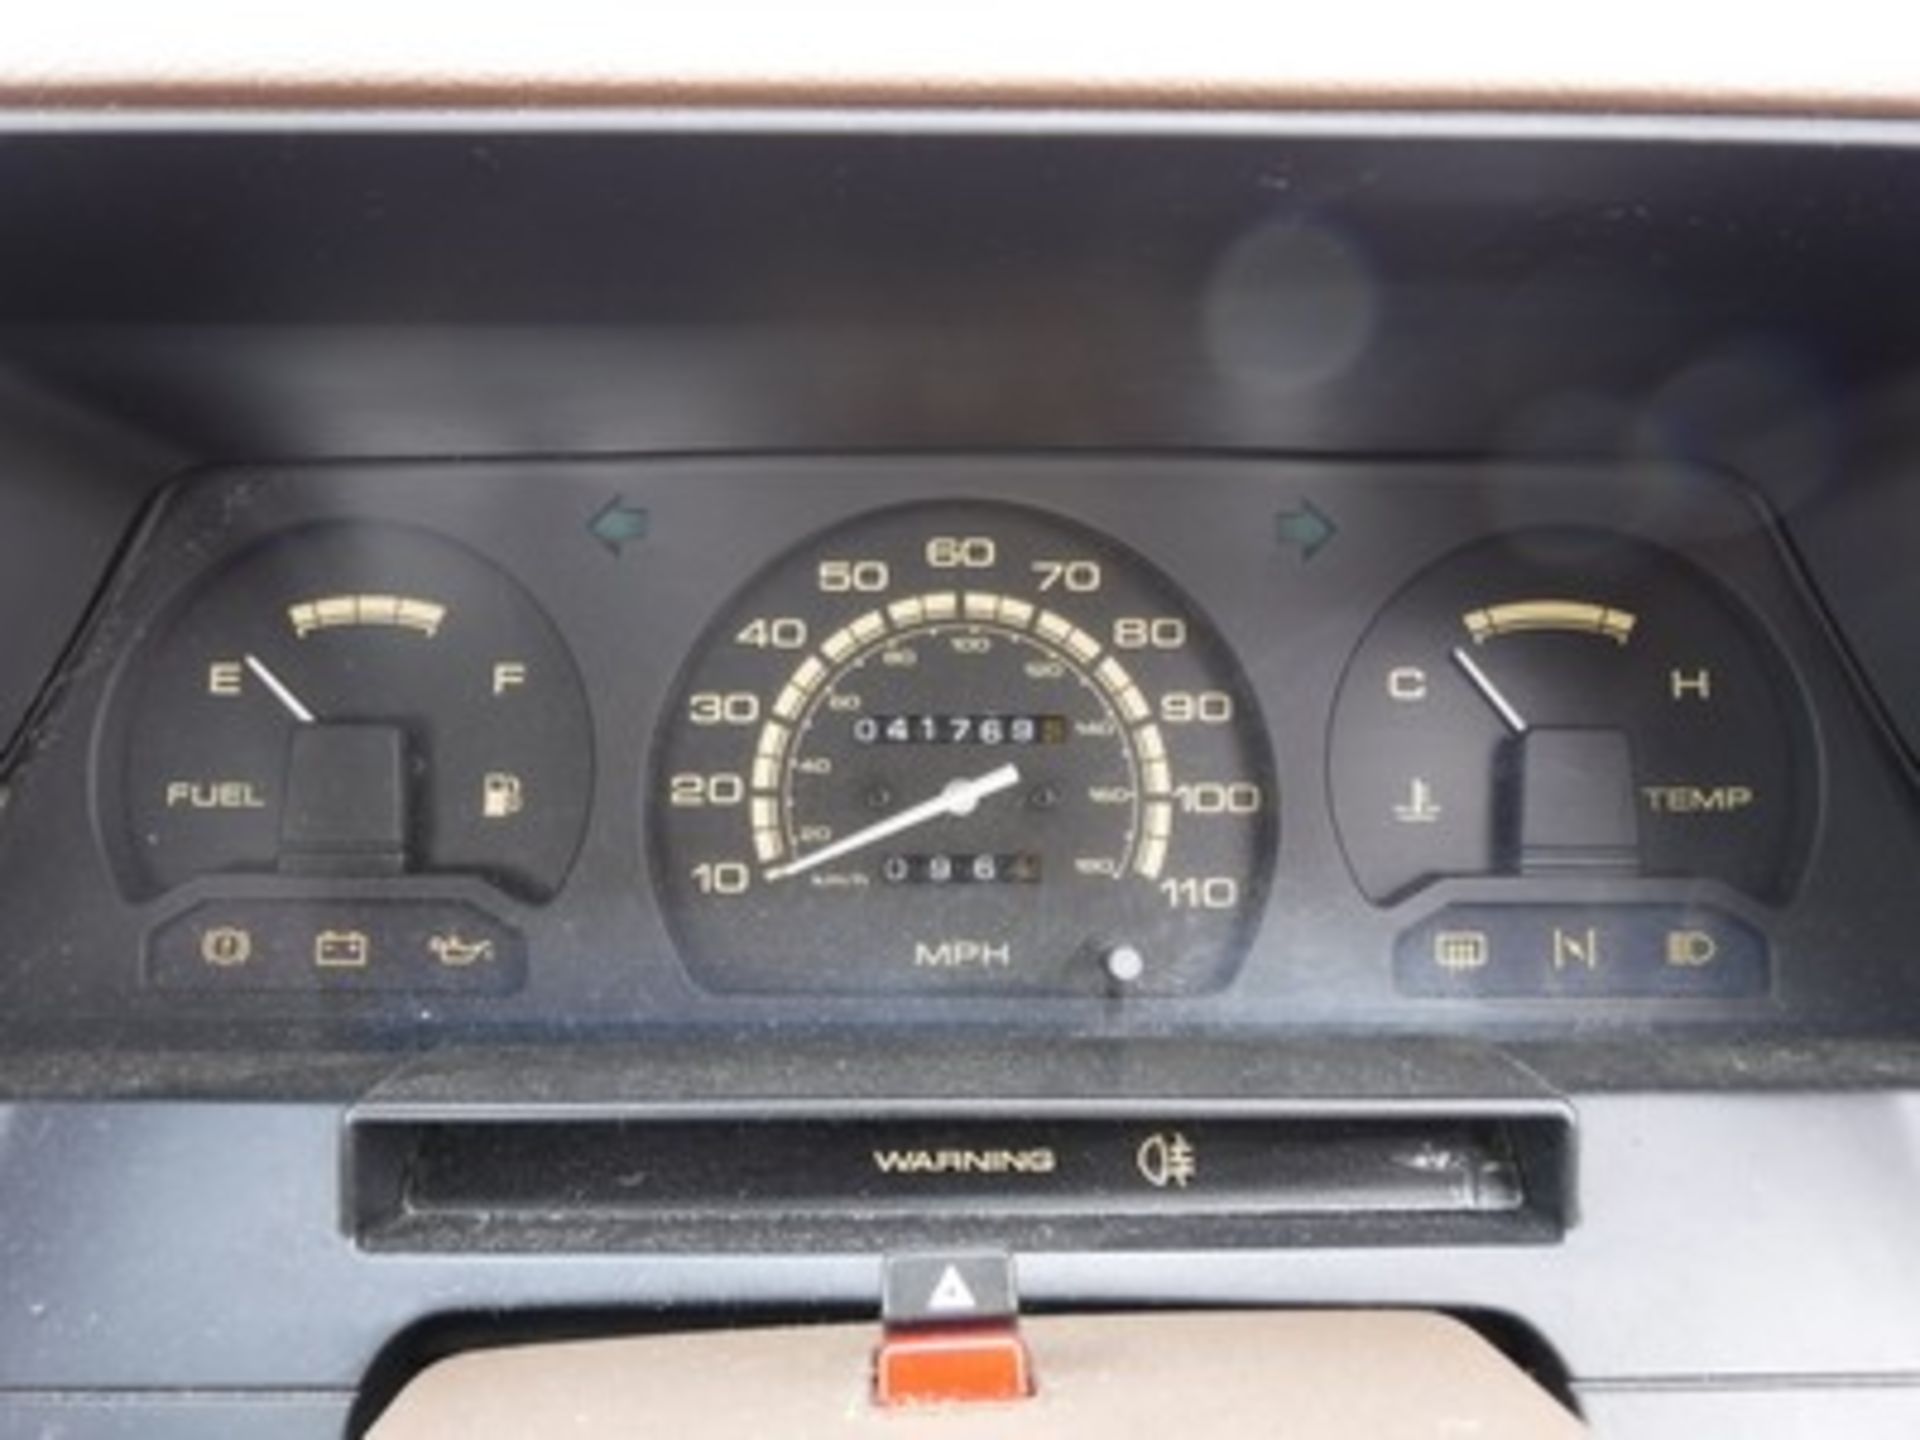 NISSAN SUNNY 1.3GS - 1270cc - Image 10 of 11